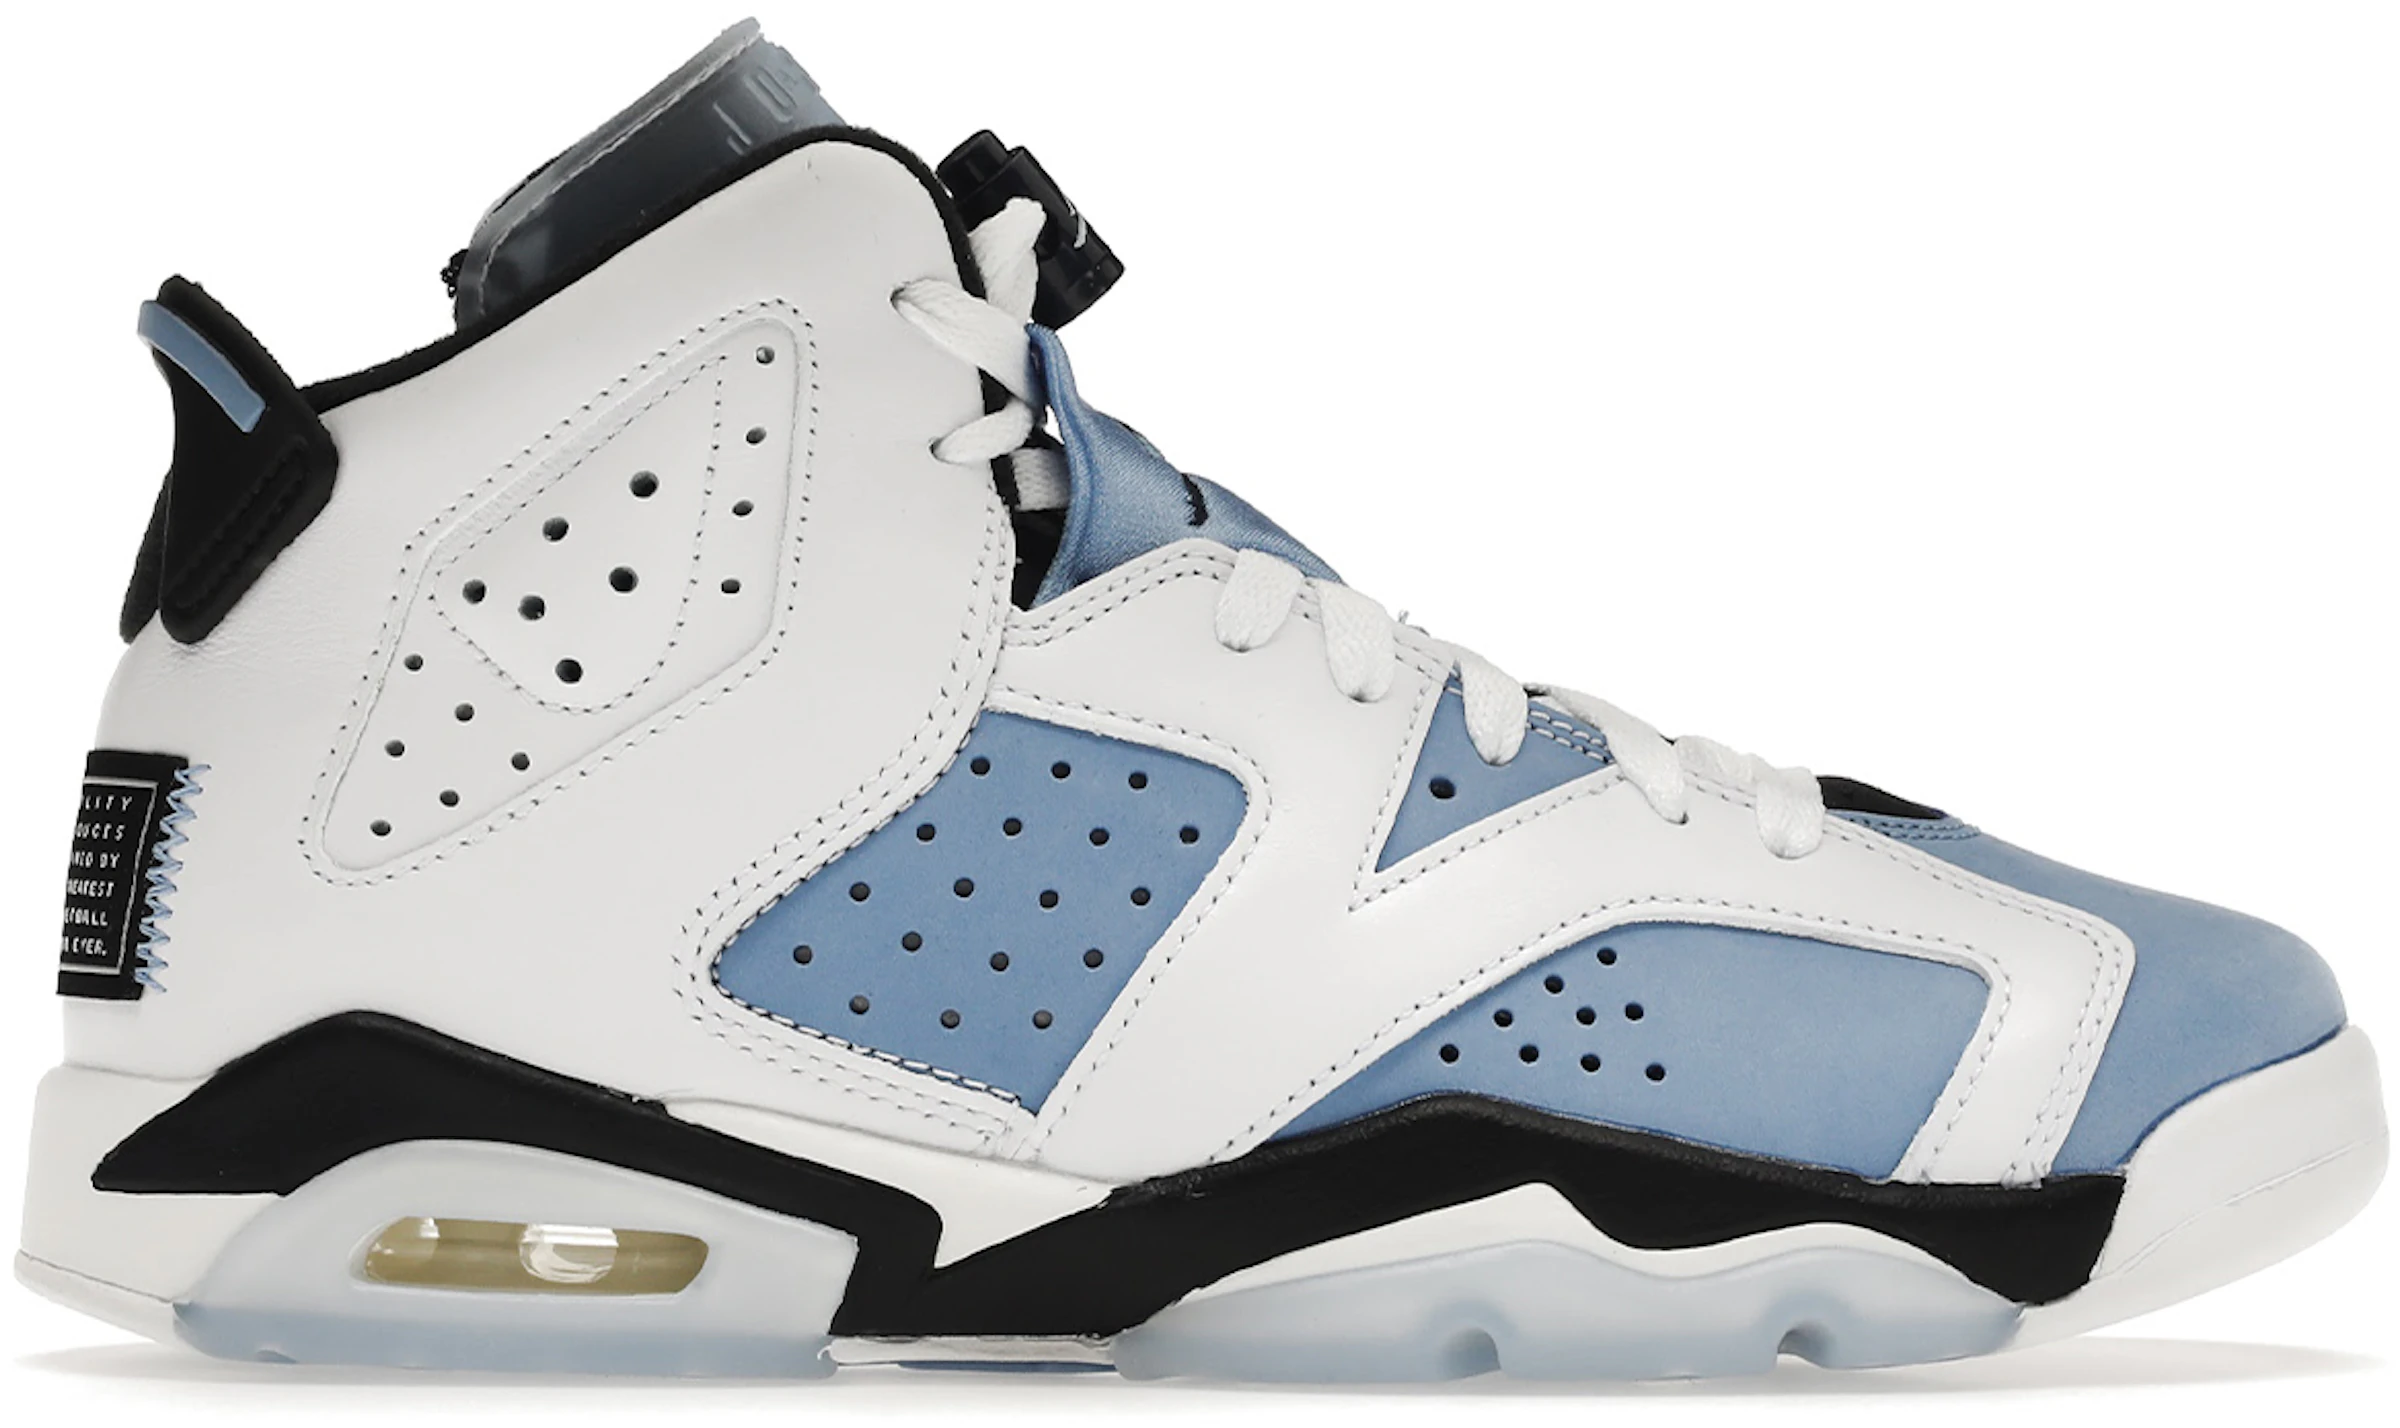 Jordan 6 - All Sizes & Colorways from $74 at StockX